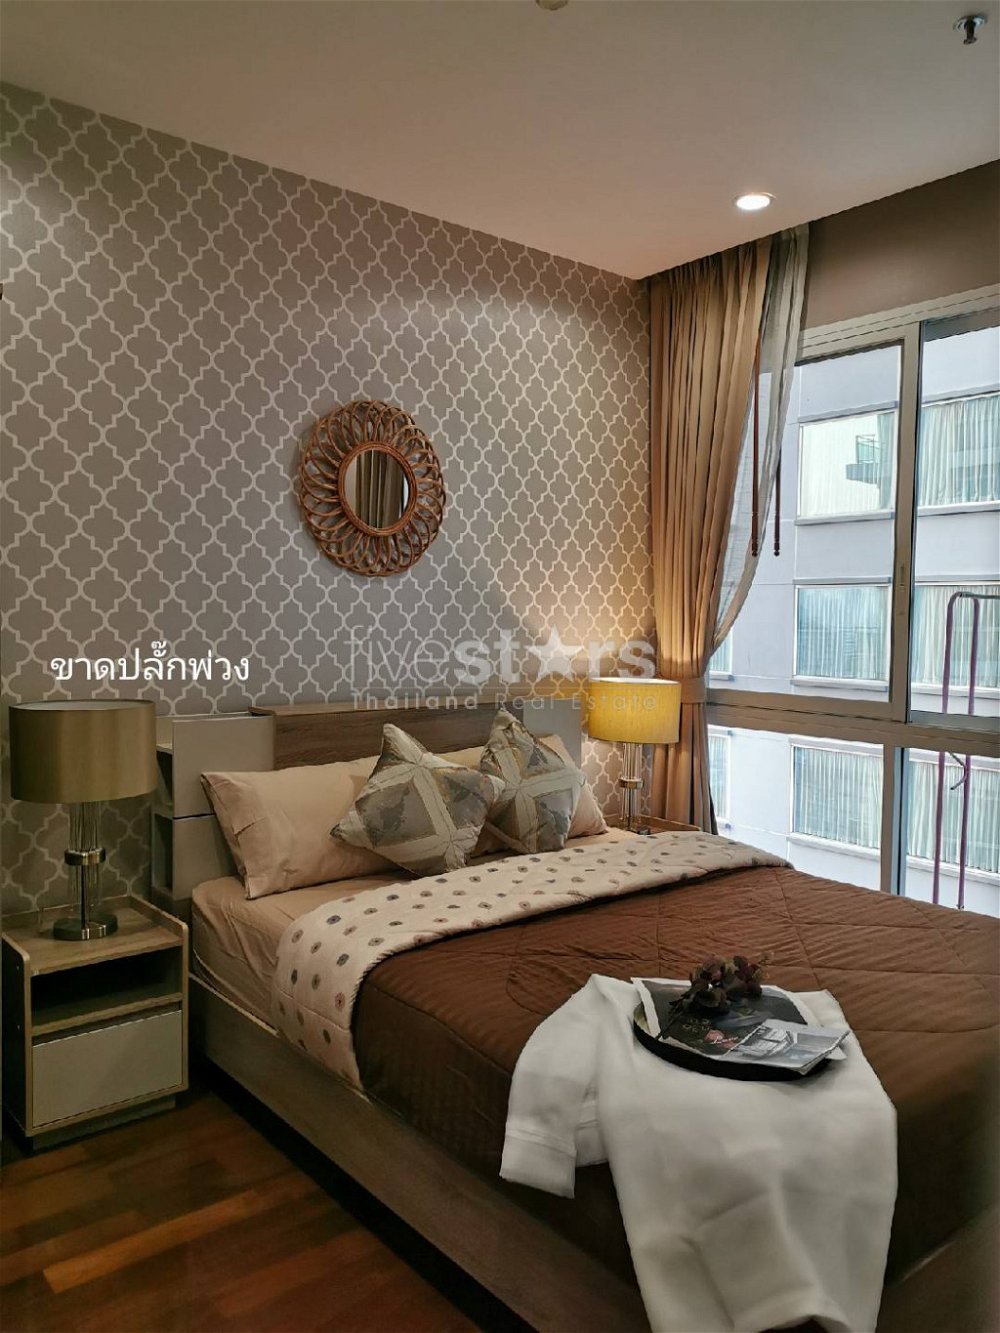 1-bedroom condo for sale close to Nana BTS station 3941456892